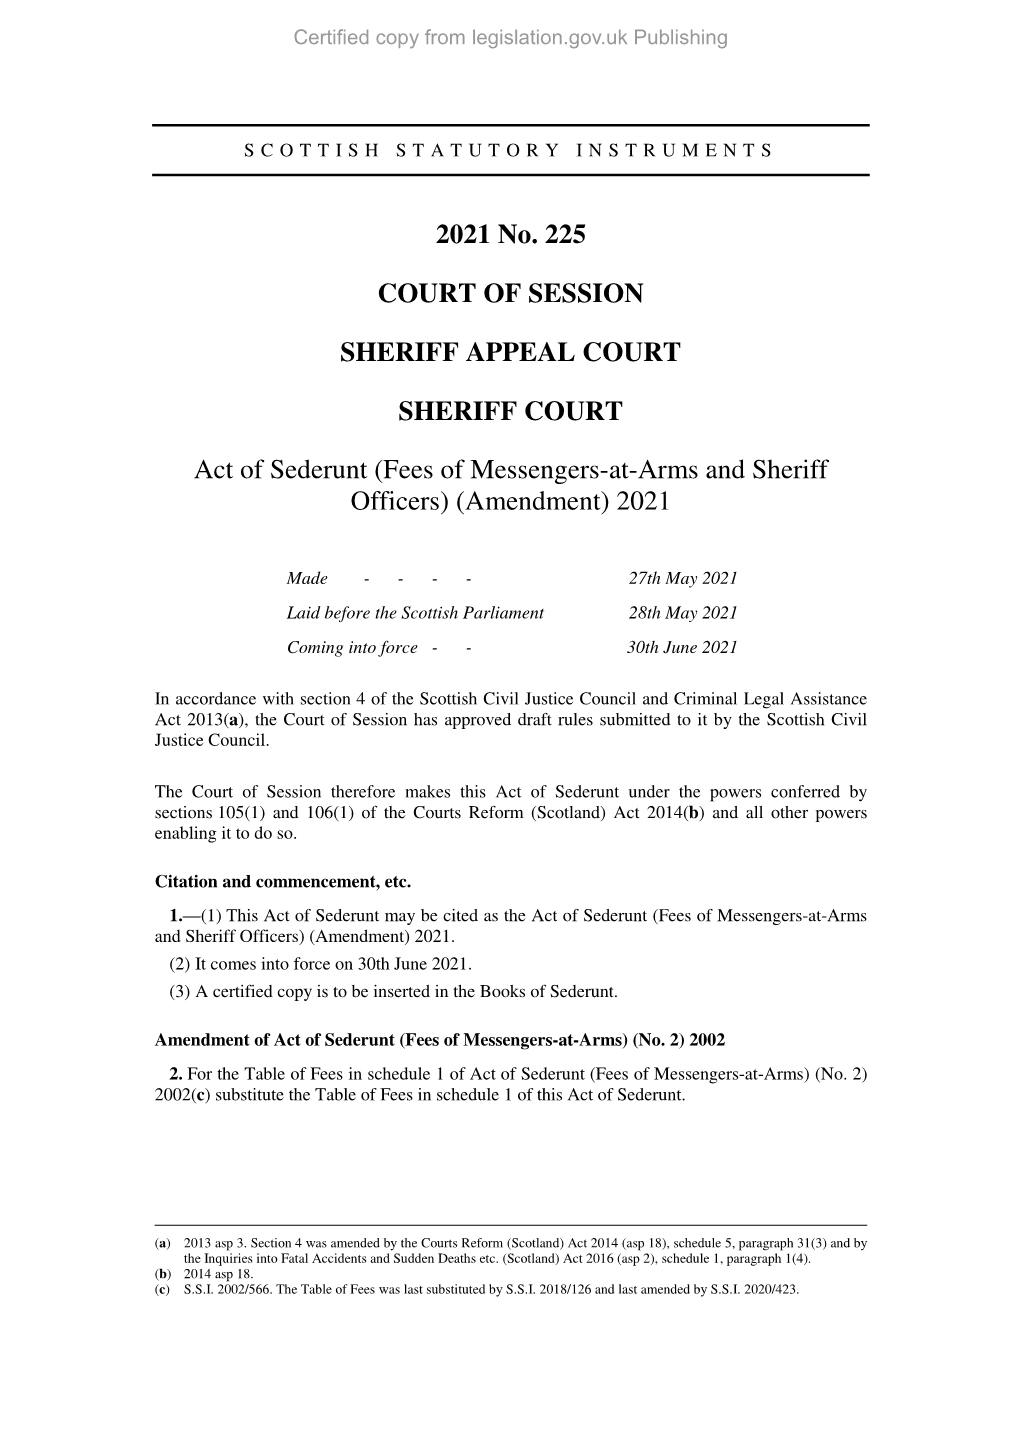 Act of Sederunt (Fees of Messengers-At-Arms and Sheriff Officers) (Amendment) 2021